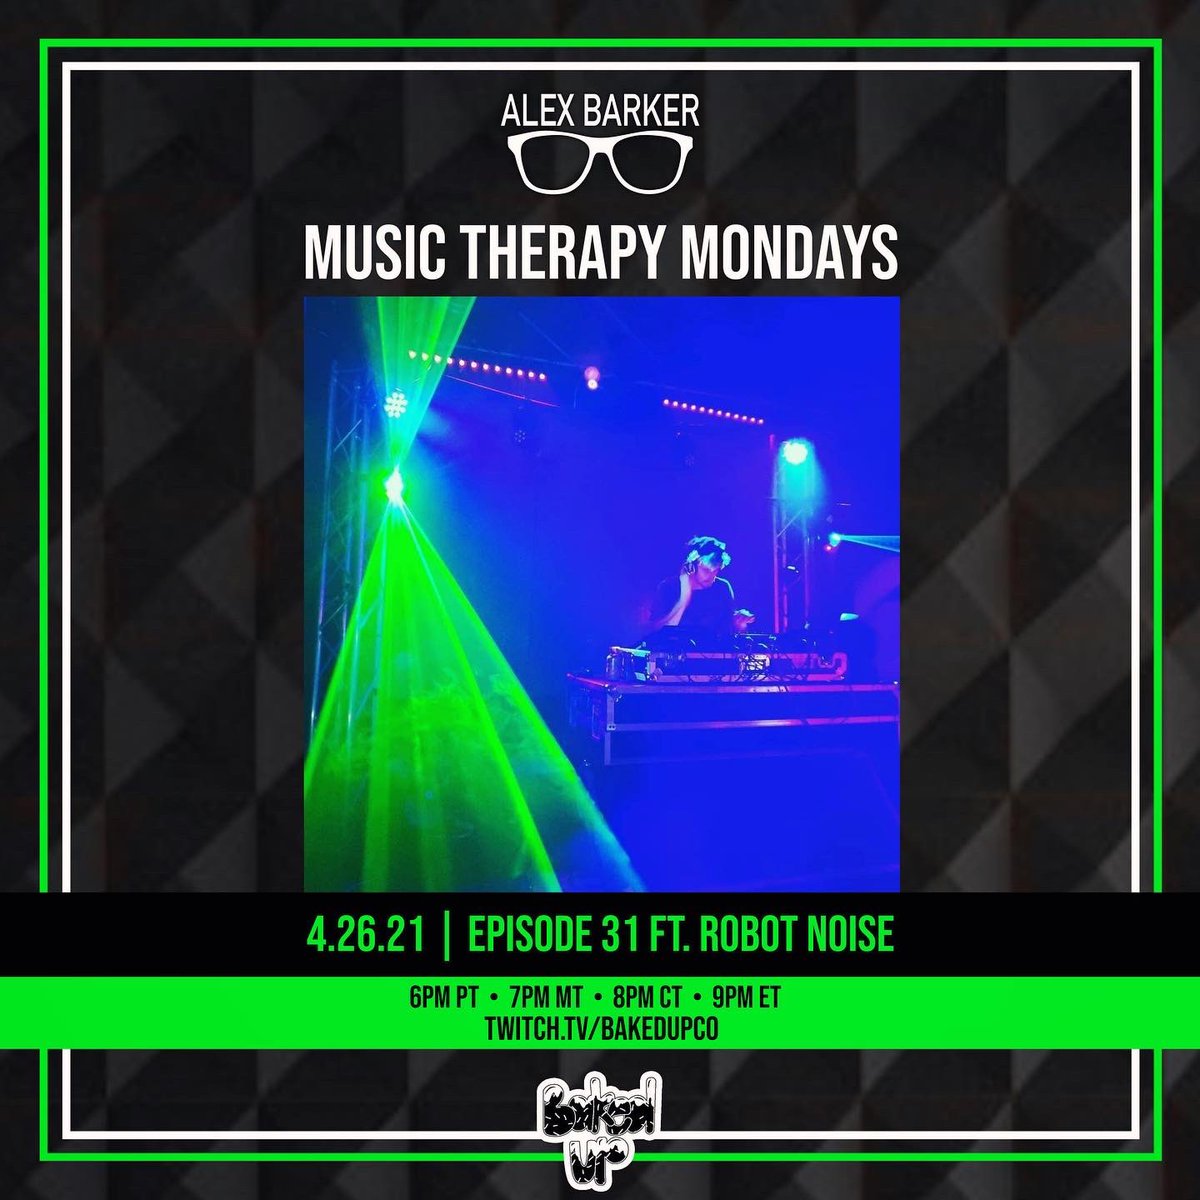 No better way to recover from a festival than enjoying some amazing sets from your living room  Join us on Twitch all week for these awesome streams Monday 4/26 - Music Therapy Monday with  @alexbarkertunes (Ep. 30 ft.  @robotnoise27) at 8PM CT  http://twitch.tv/bakedupco  pt.1